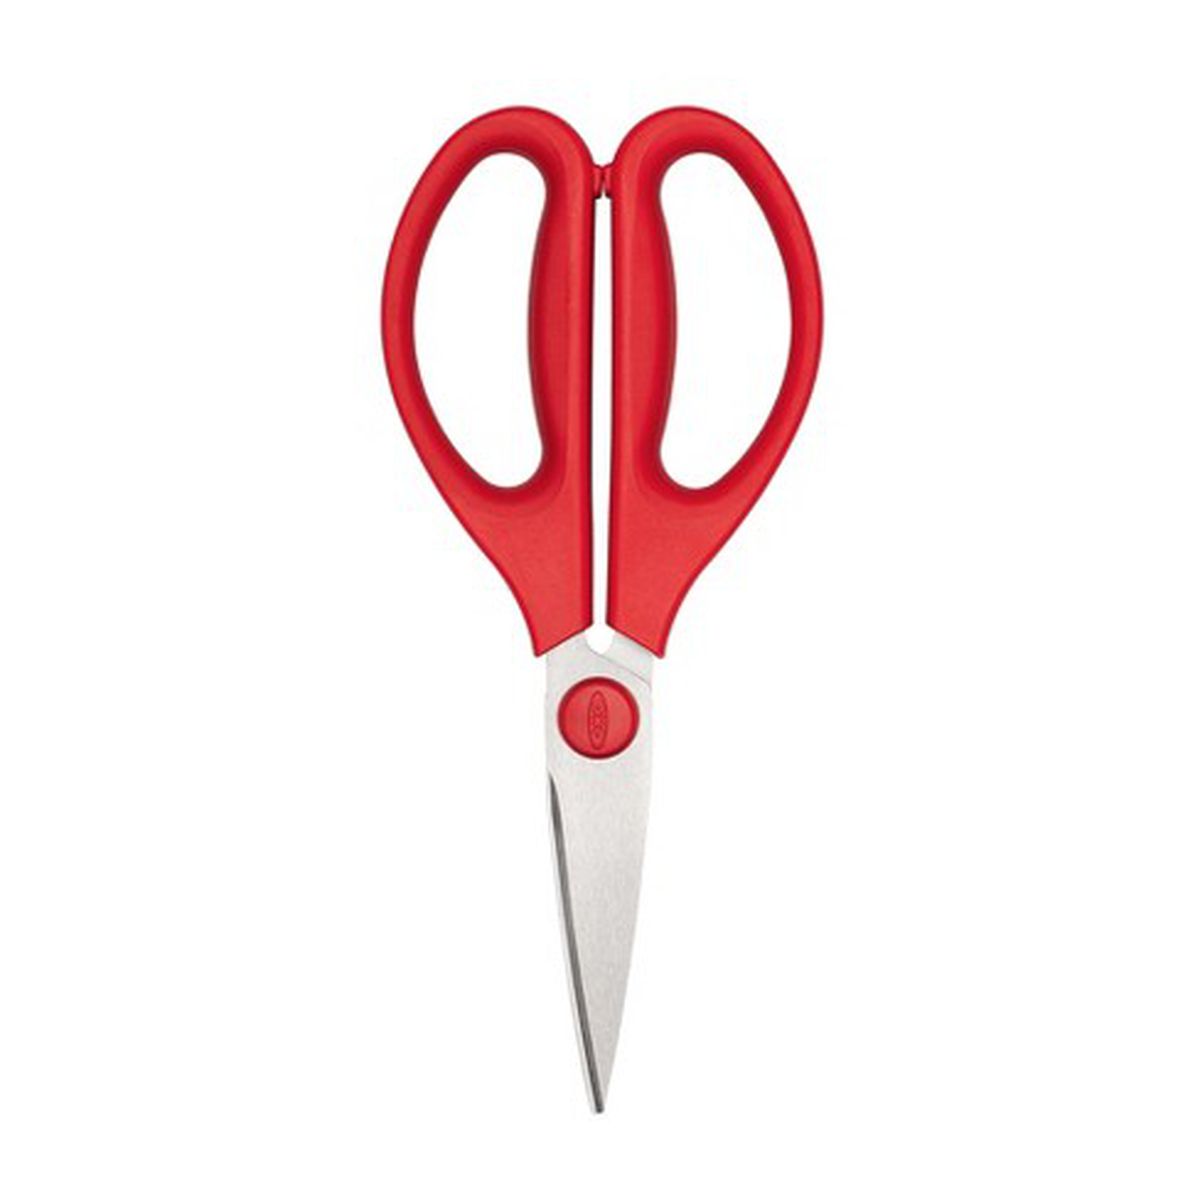 kitchen shears with a red handle